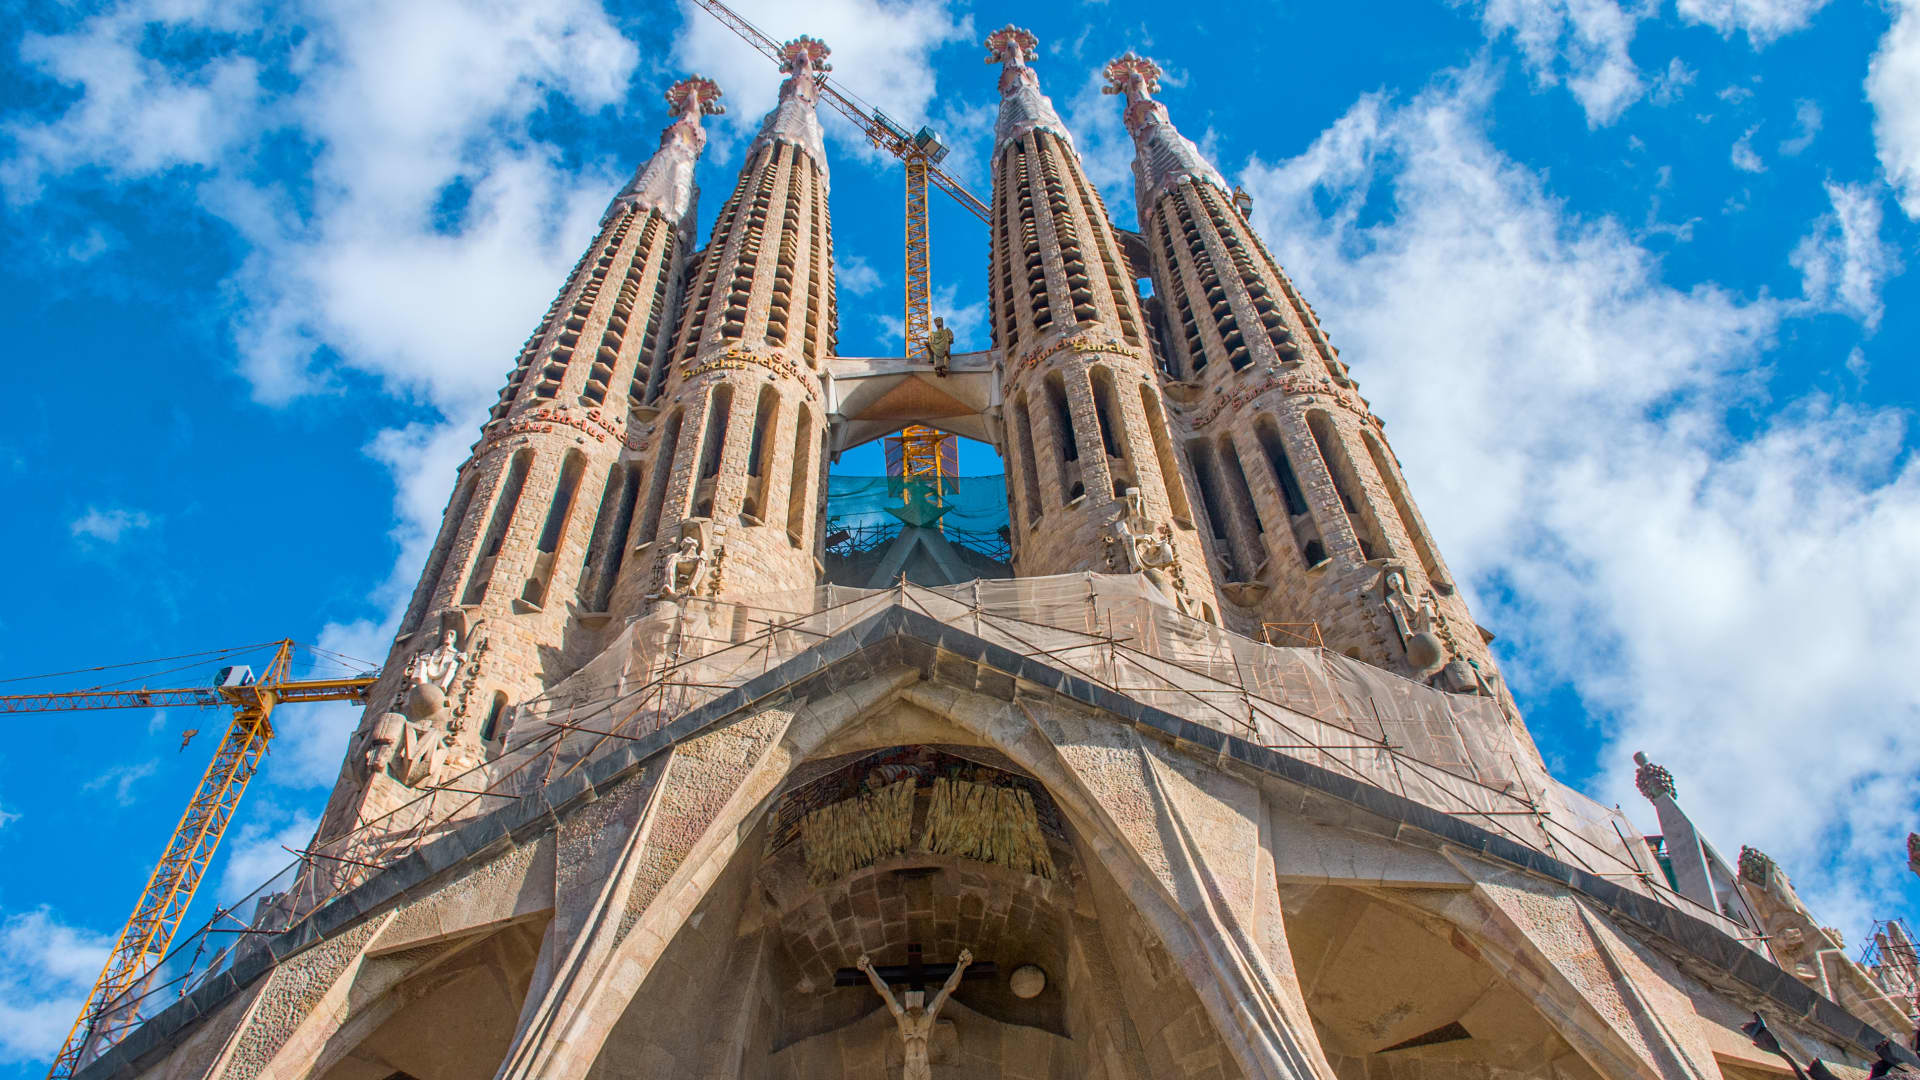 Spain's still unfinished La Sagrada Familia church narrowly edged out the U.K.'s Buckingham Palace in terms of global search interest in the past year.